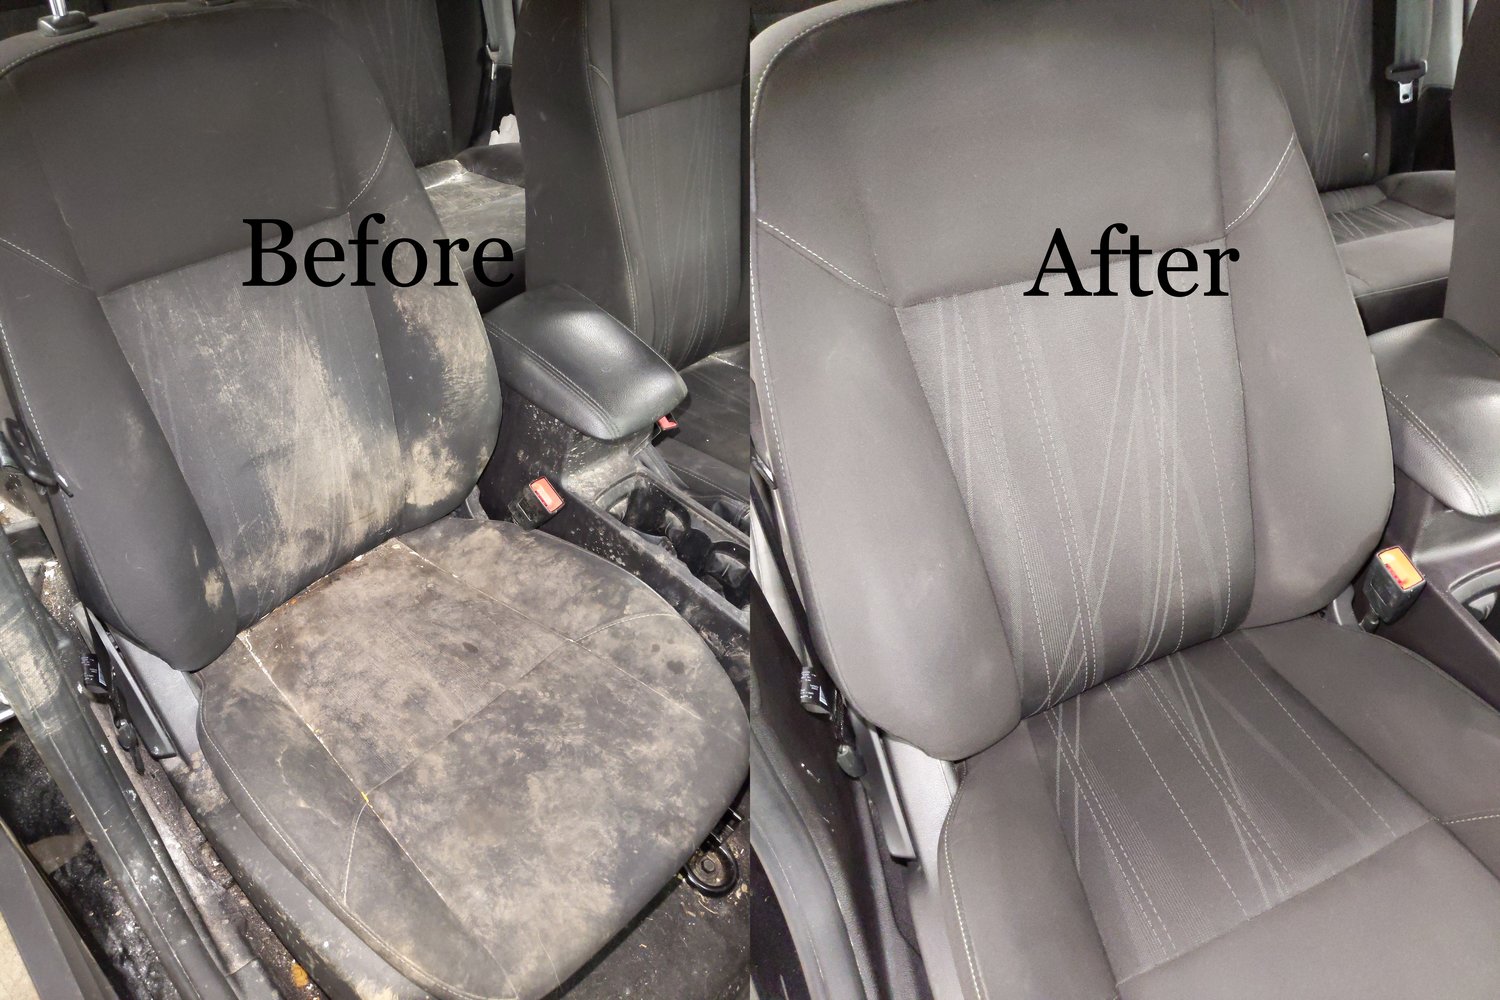 How To Get Stains Out Of Seats Mobile Car Detailing | Winston Salem, NC — The Best Way To Clean Car  Upholstery & Remove Stains - Car Detailing Guide